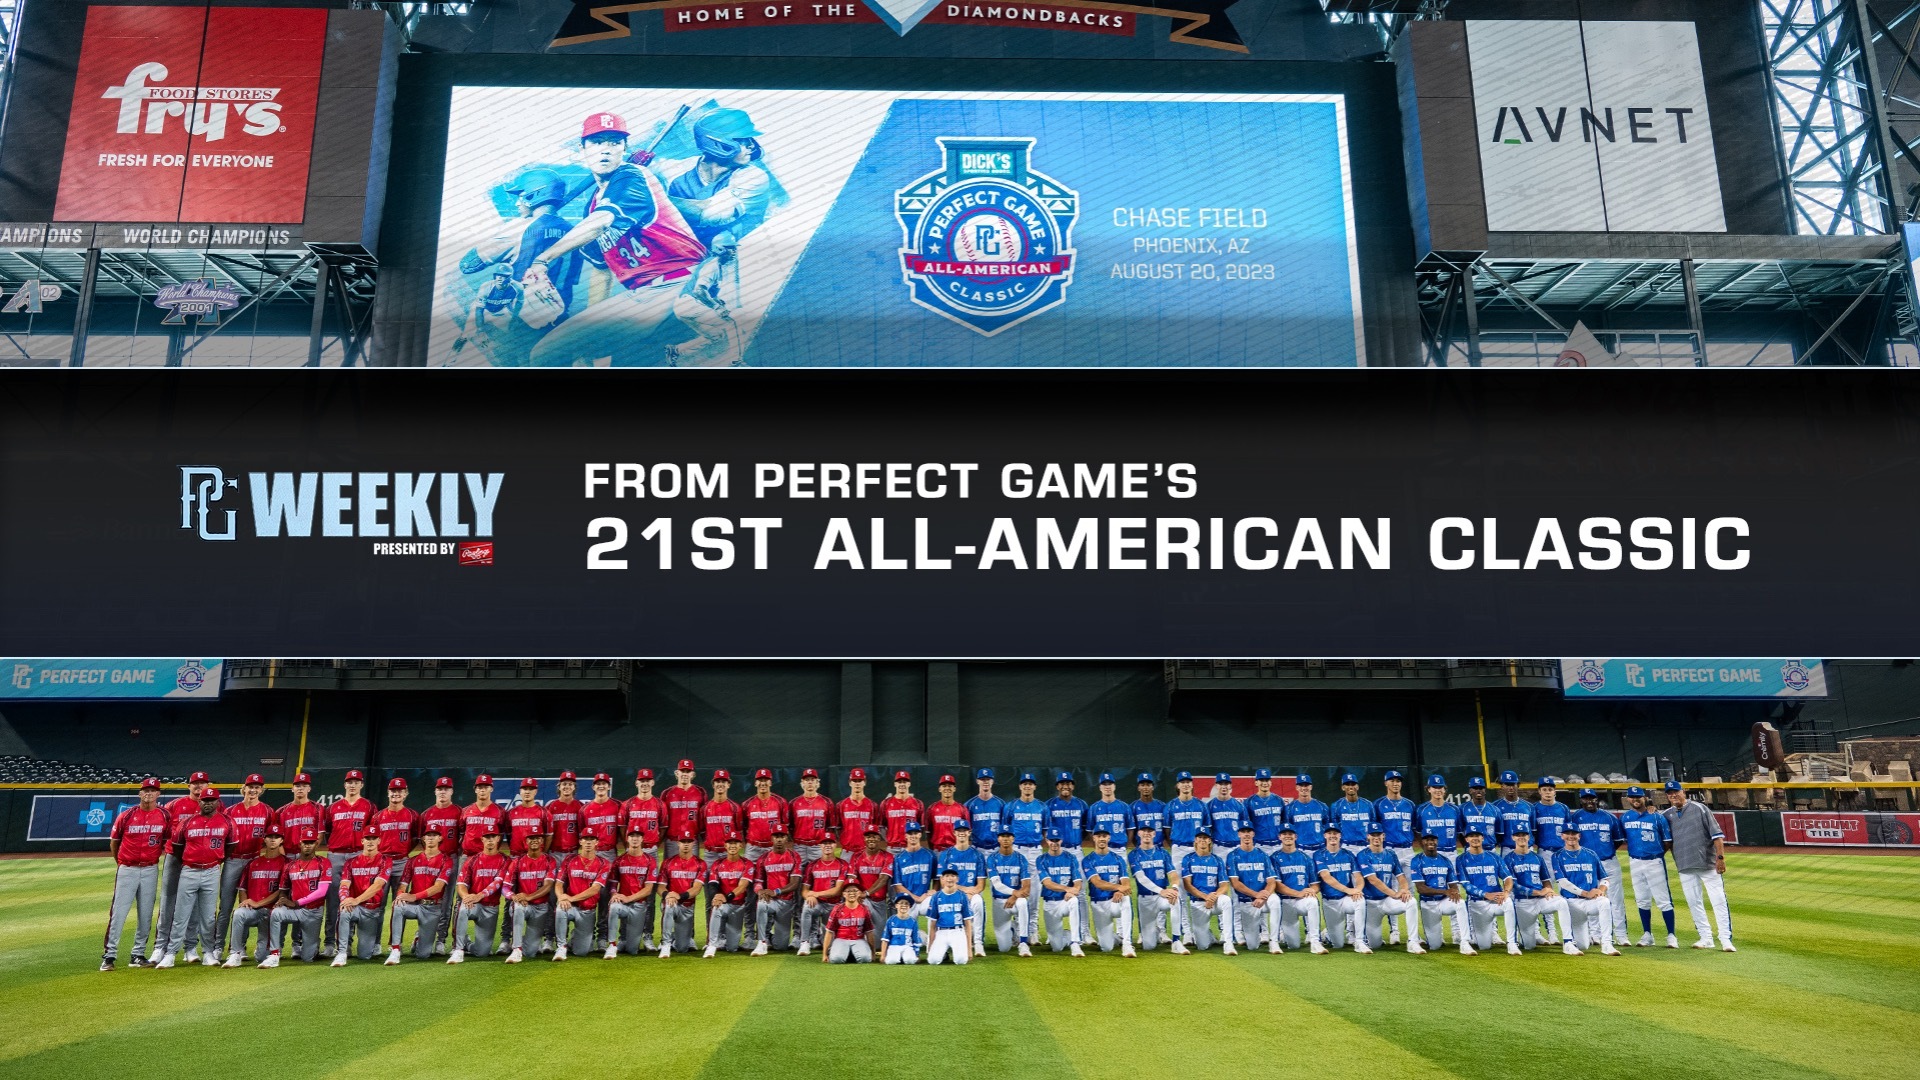 MLB All-Star Game 2022: Sights, sounds from Day 1 at Futures Game